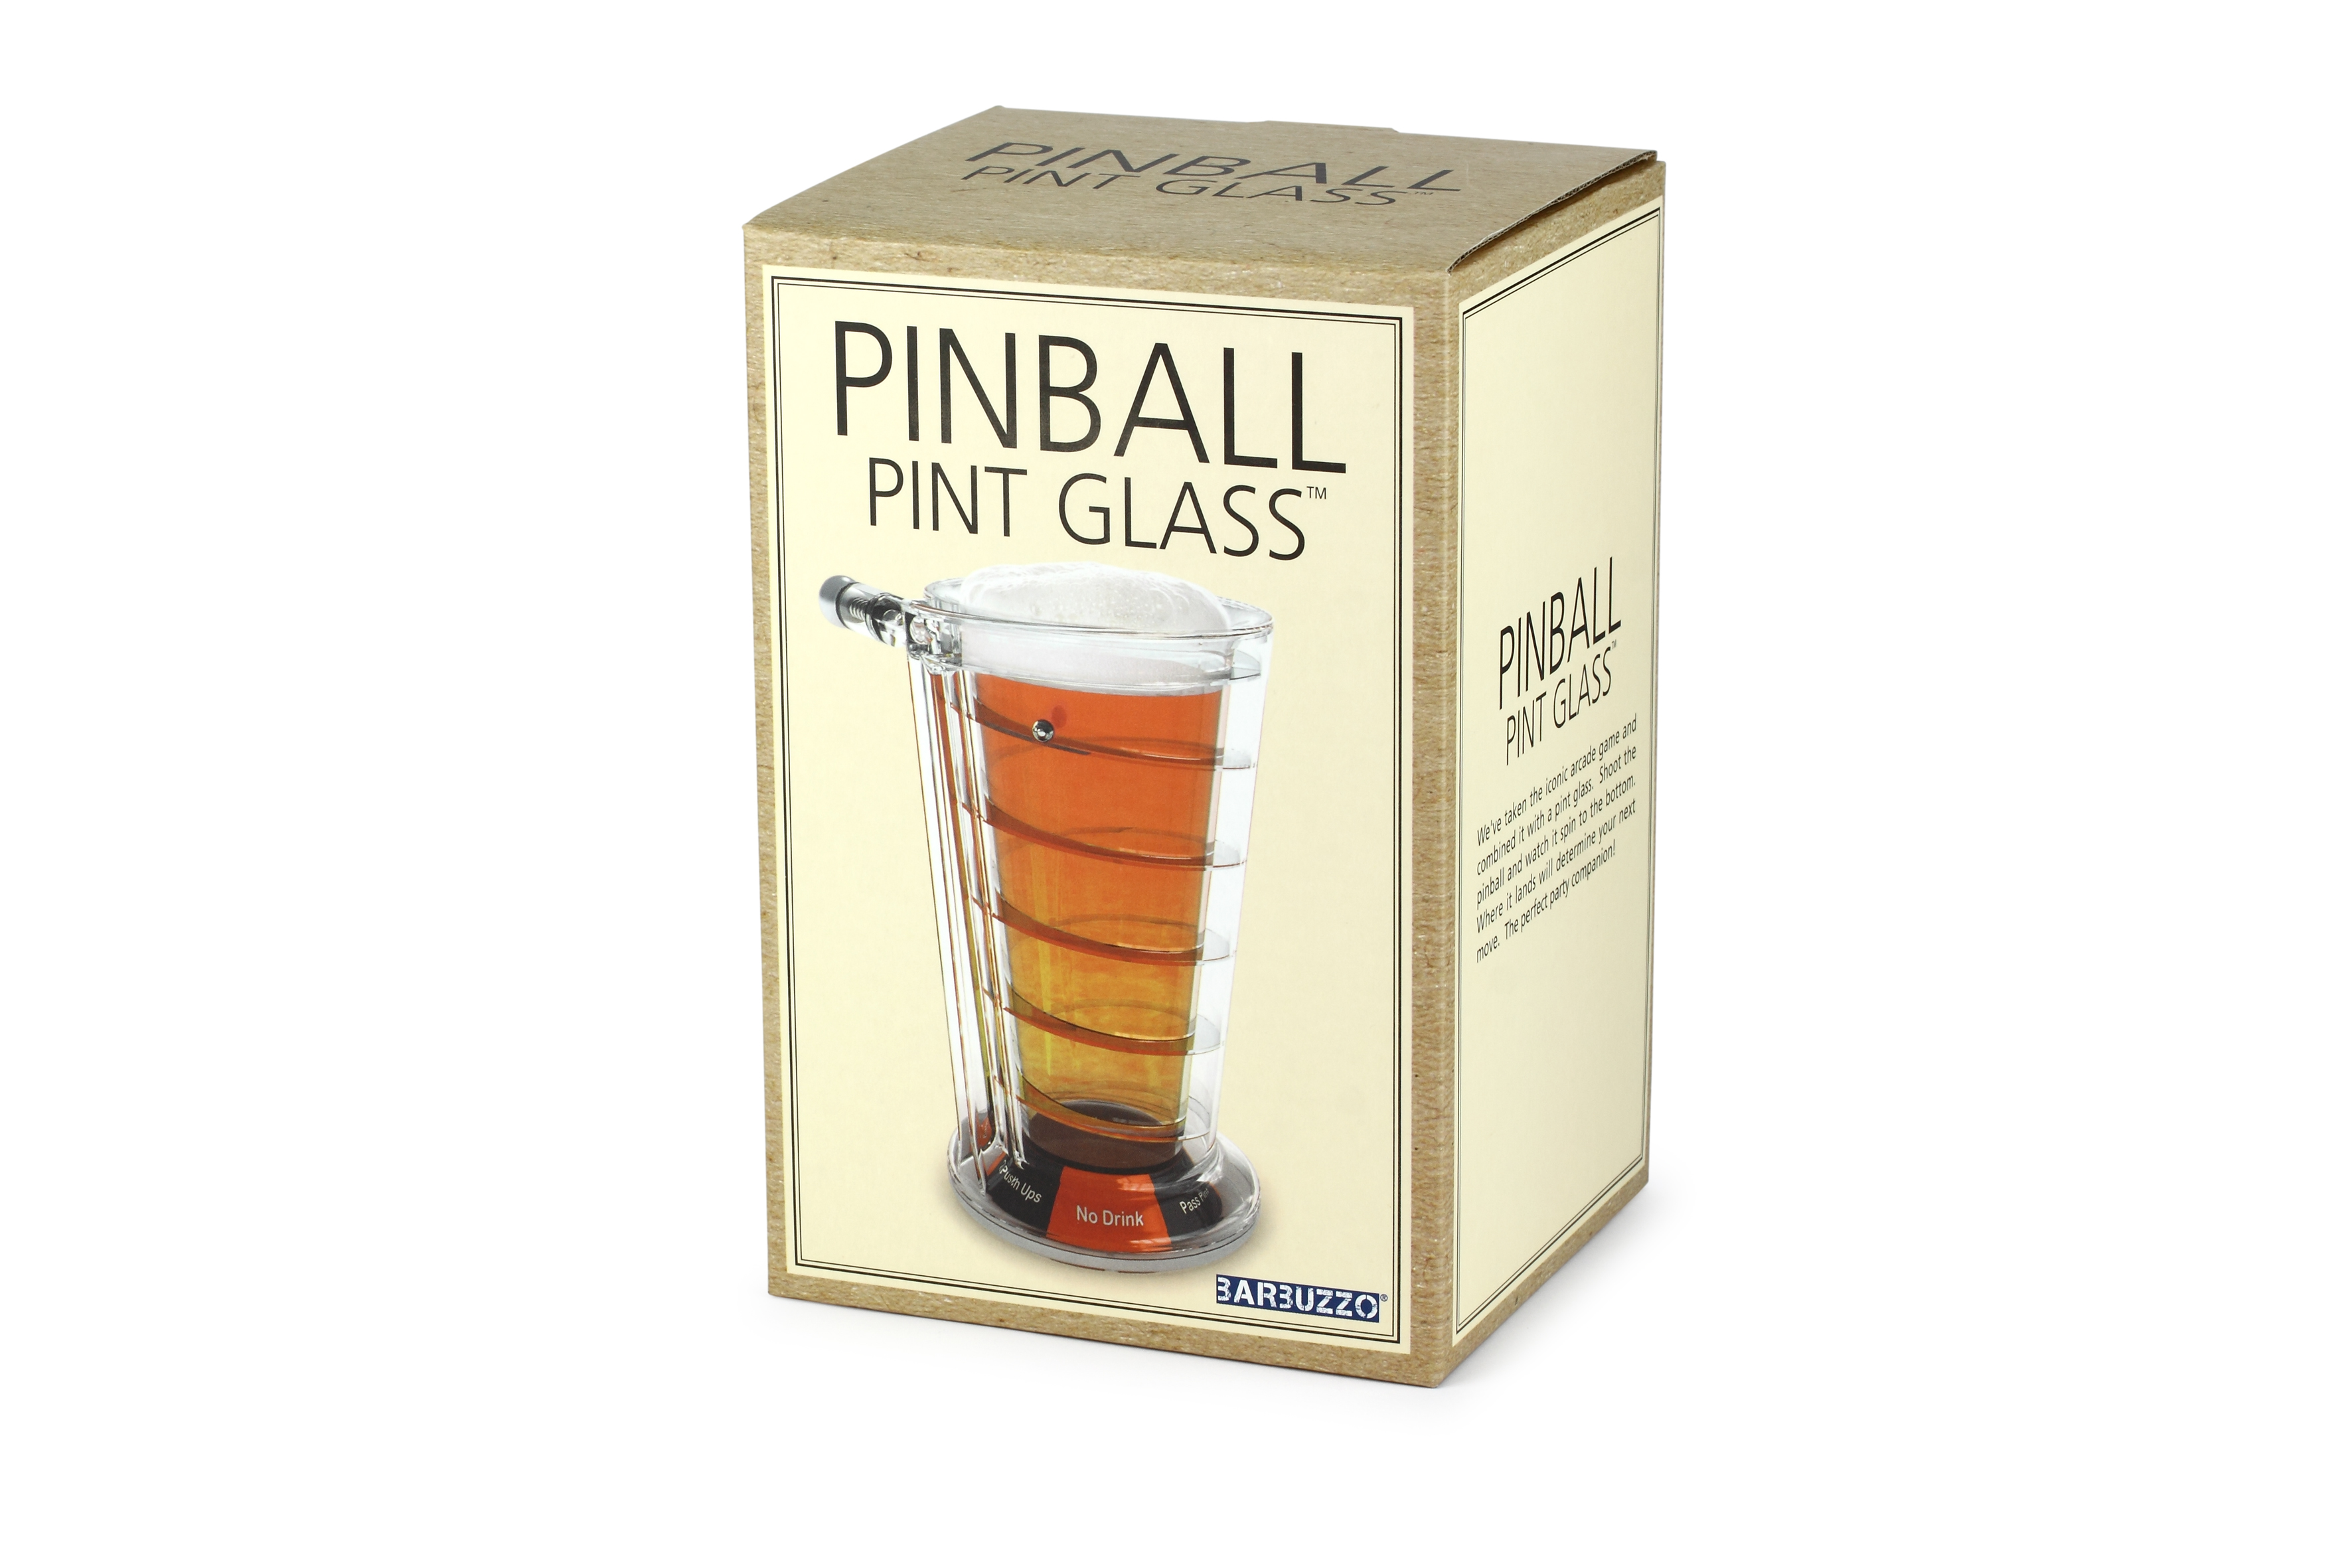 Pinball Beer Glass - $15.99 : , Unique Gifts and Fun